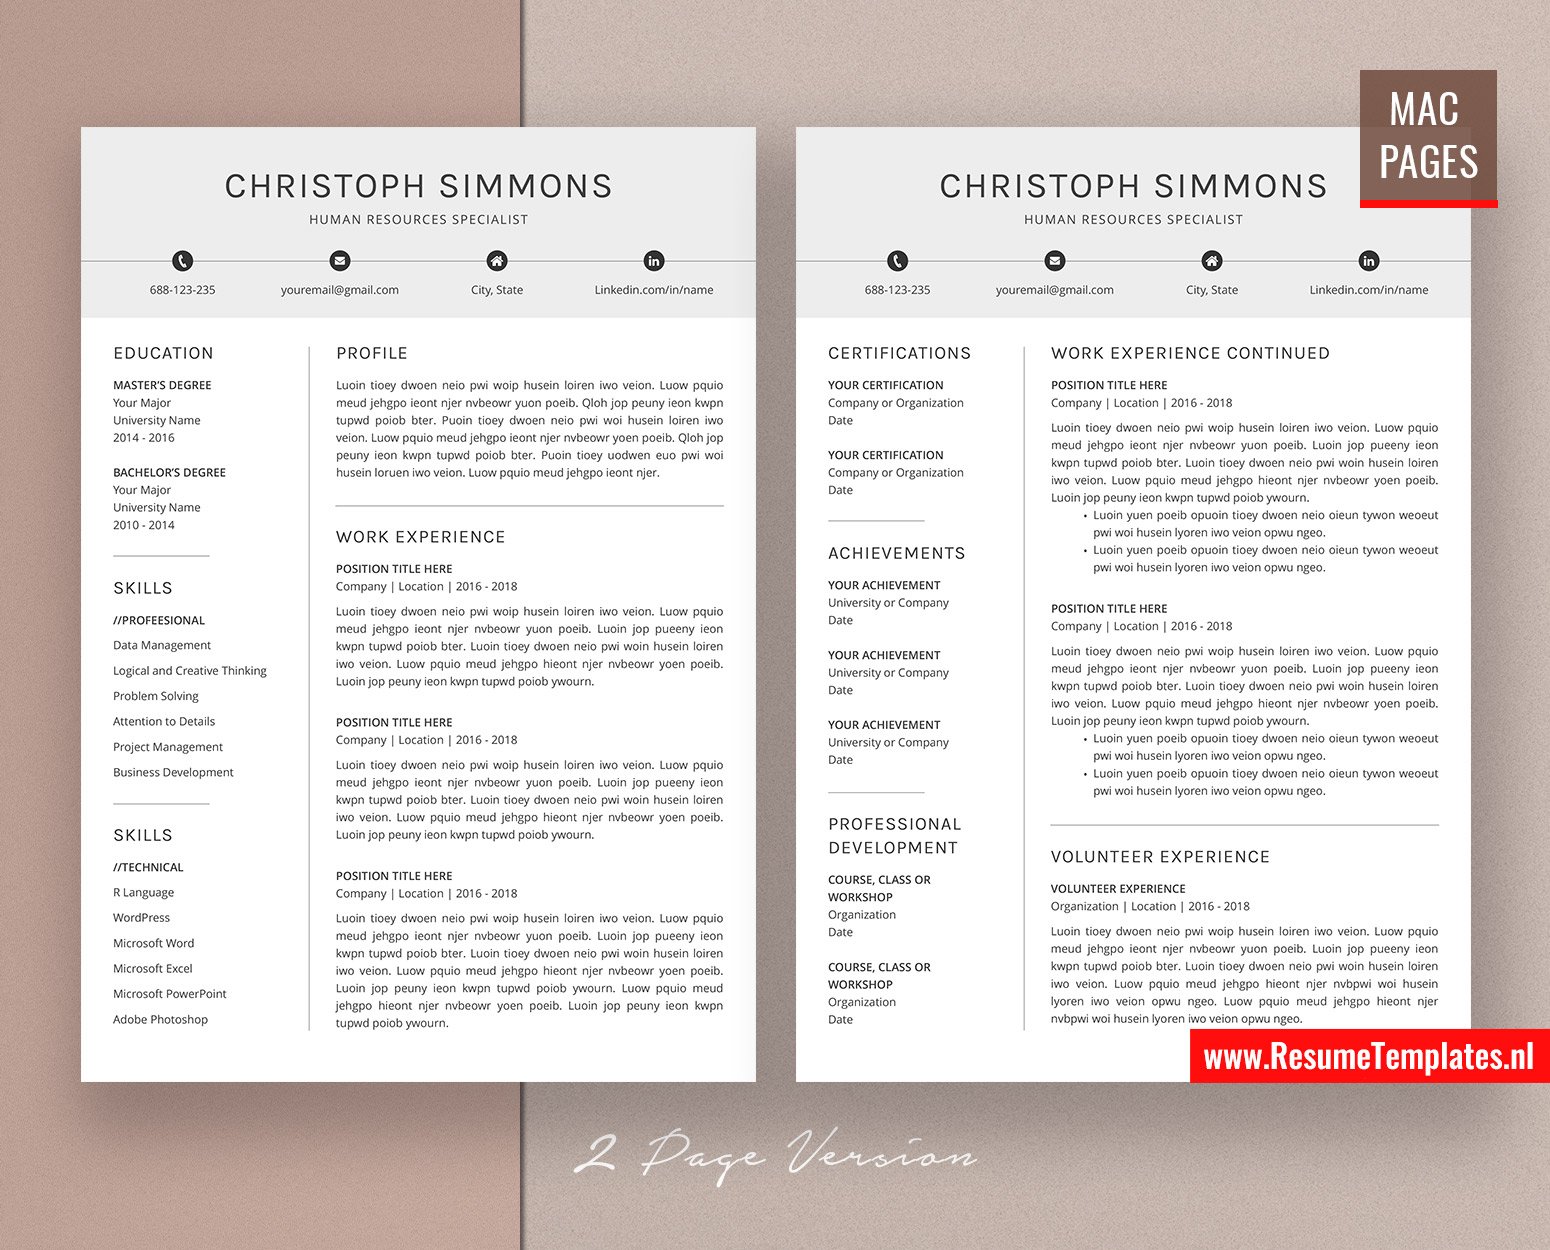 Minimalist CV Template for Mac Pages, Cover Letter ...